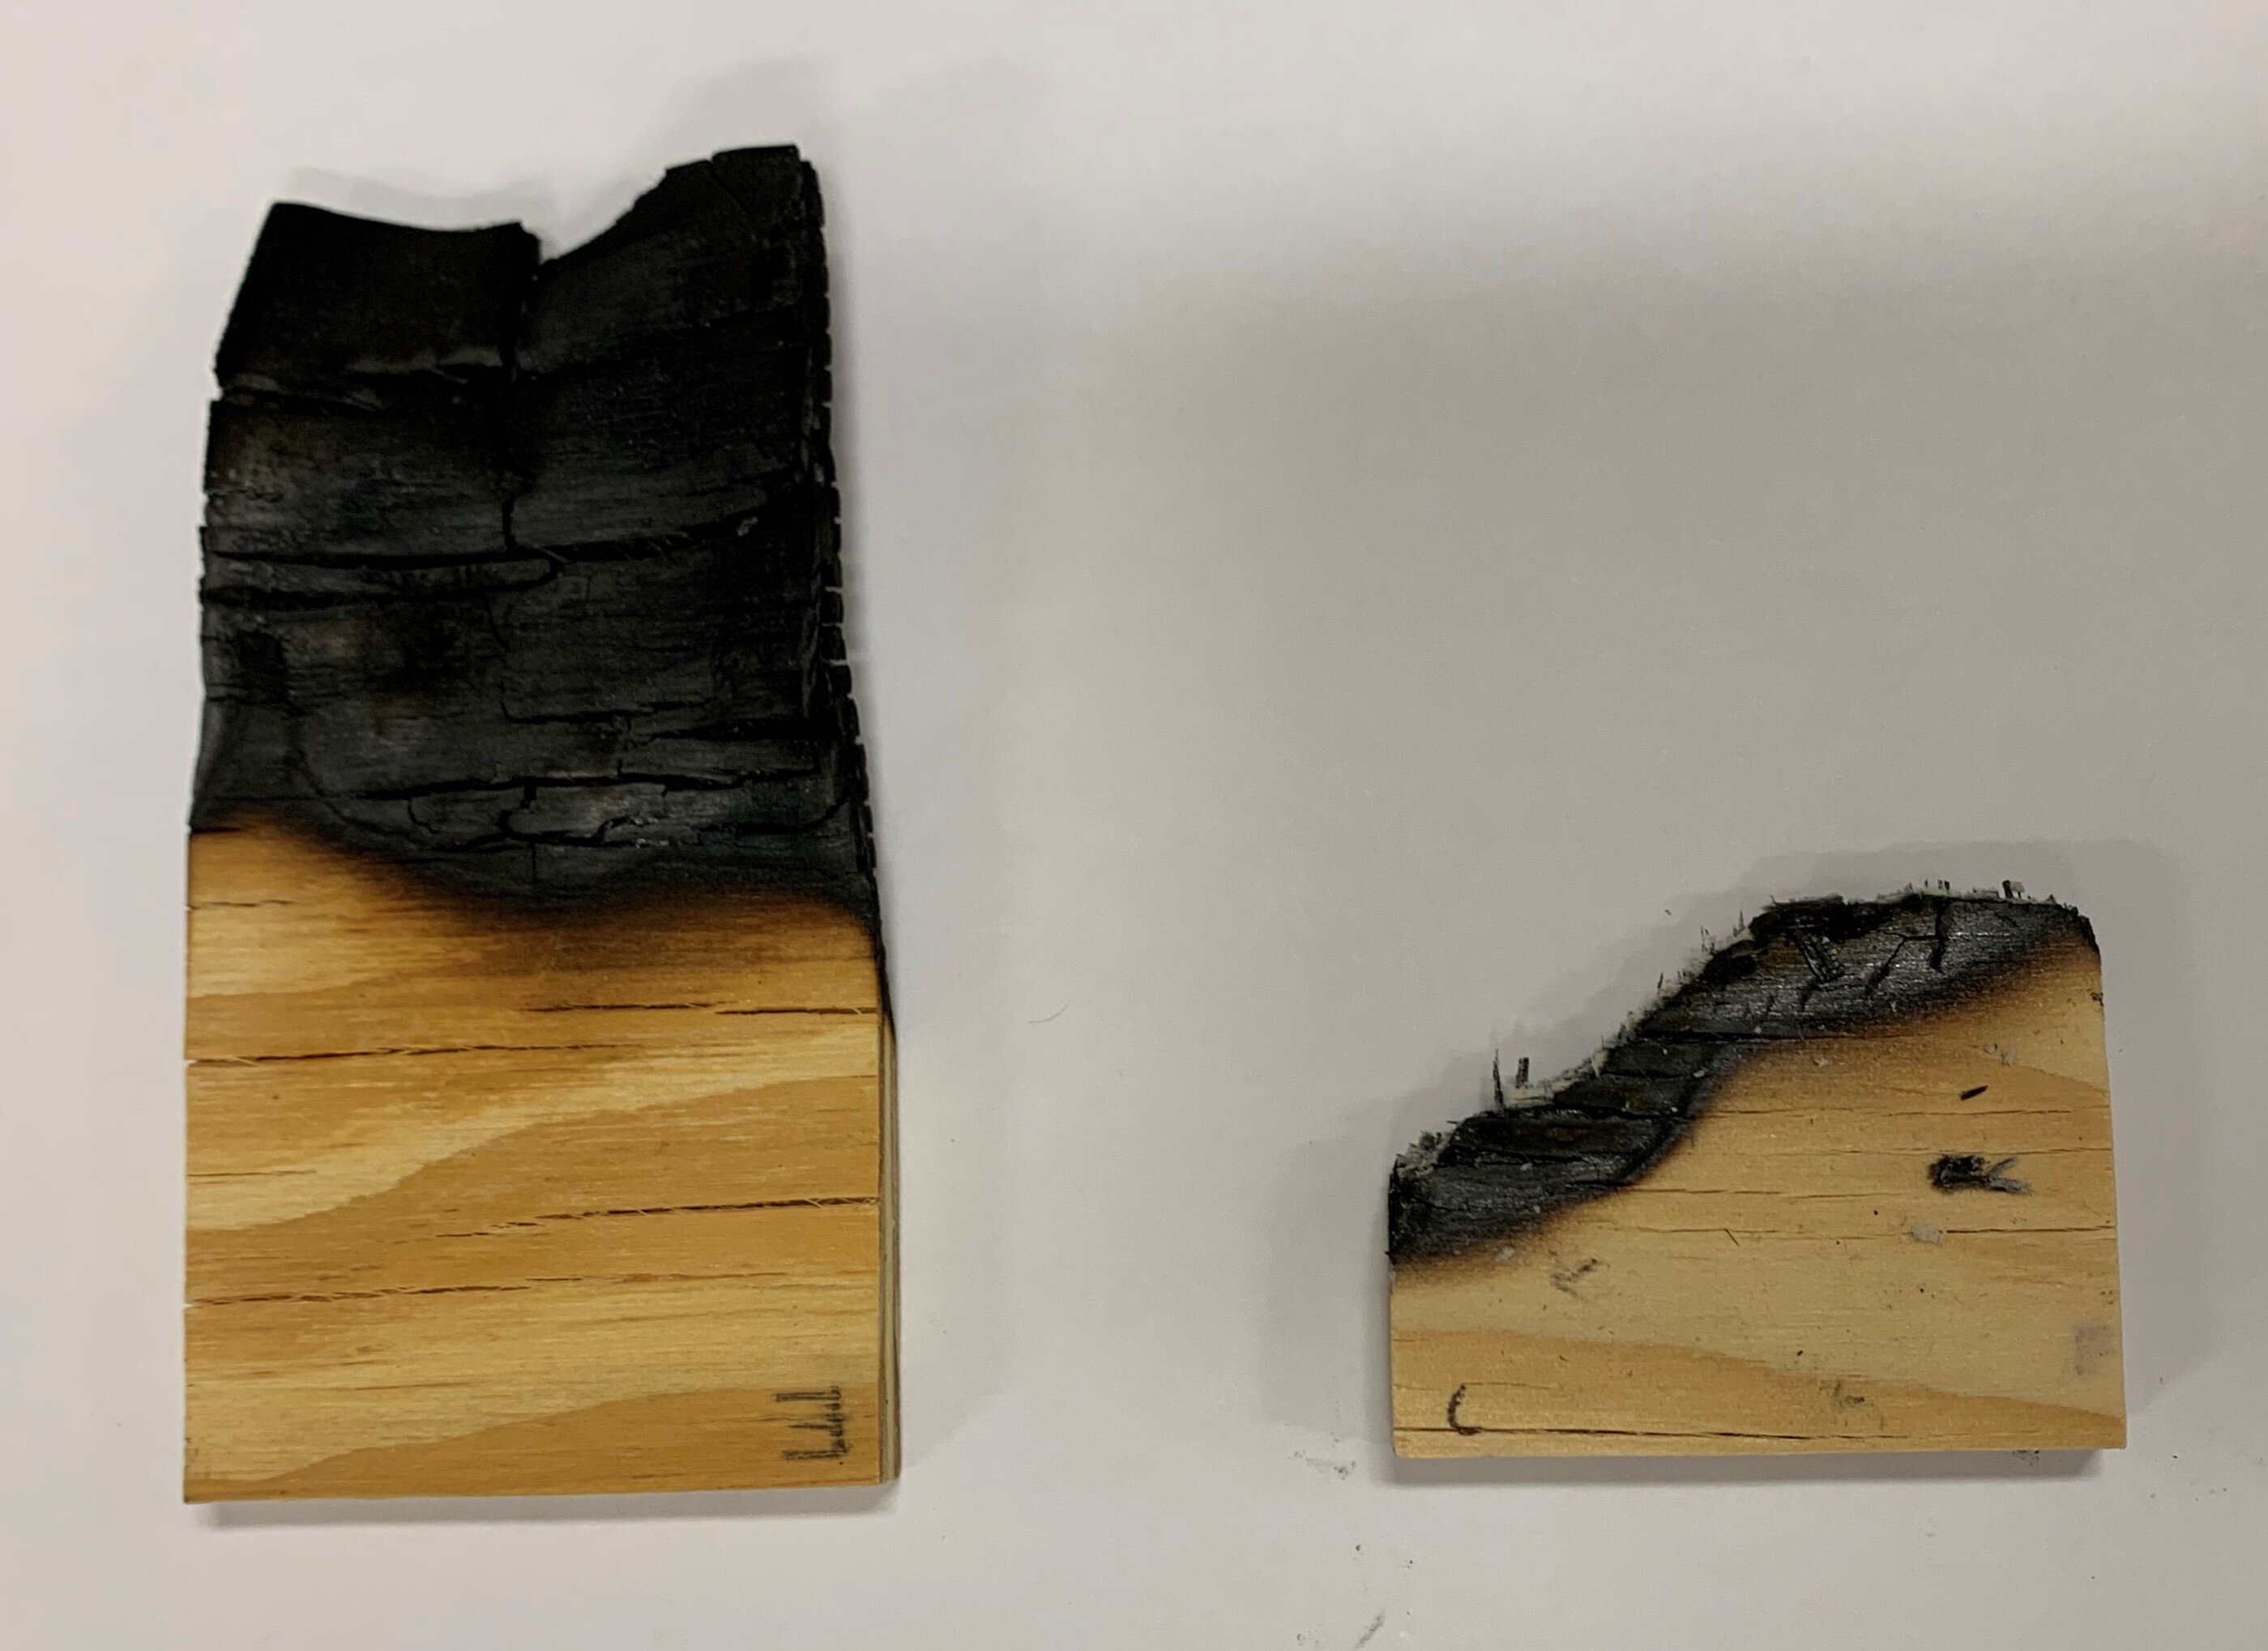 Making wooden construction materials fire-resistant with an eco-friendly coating